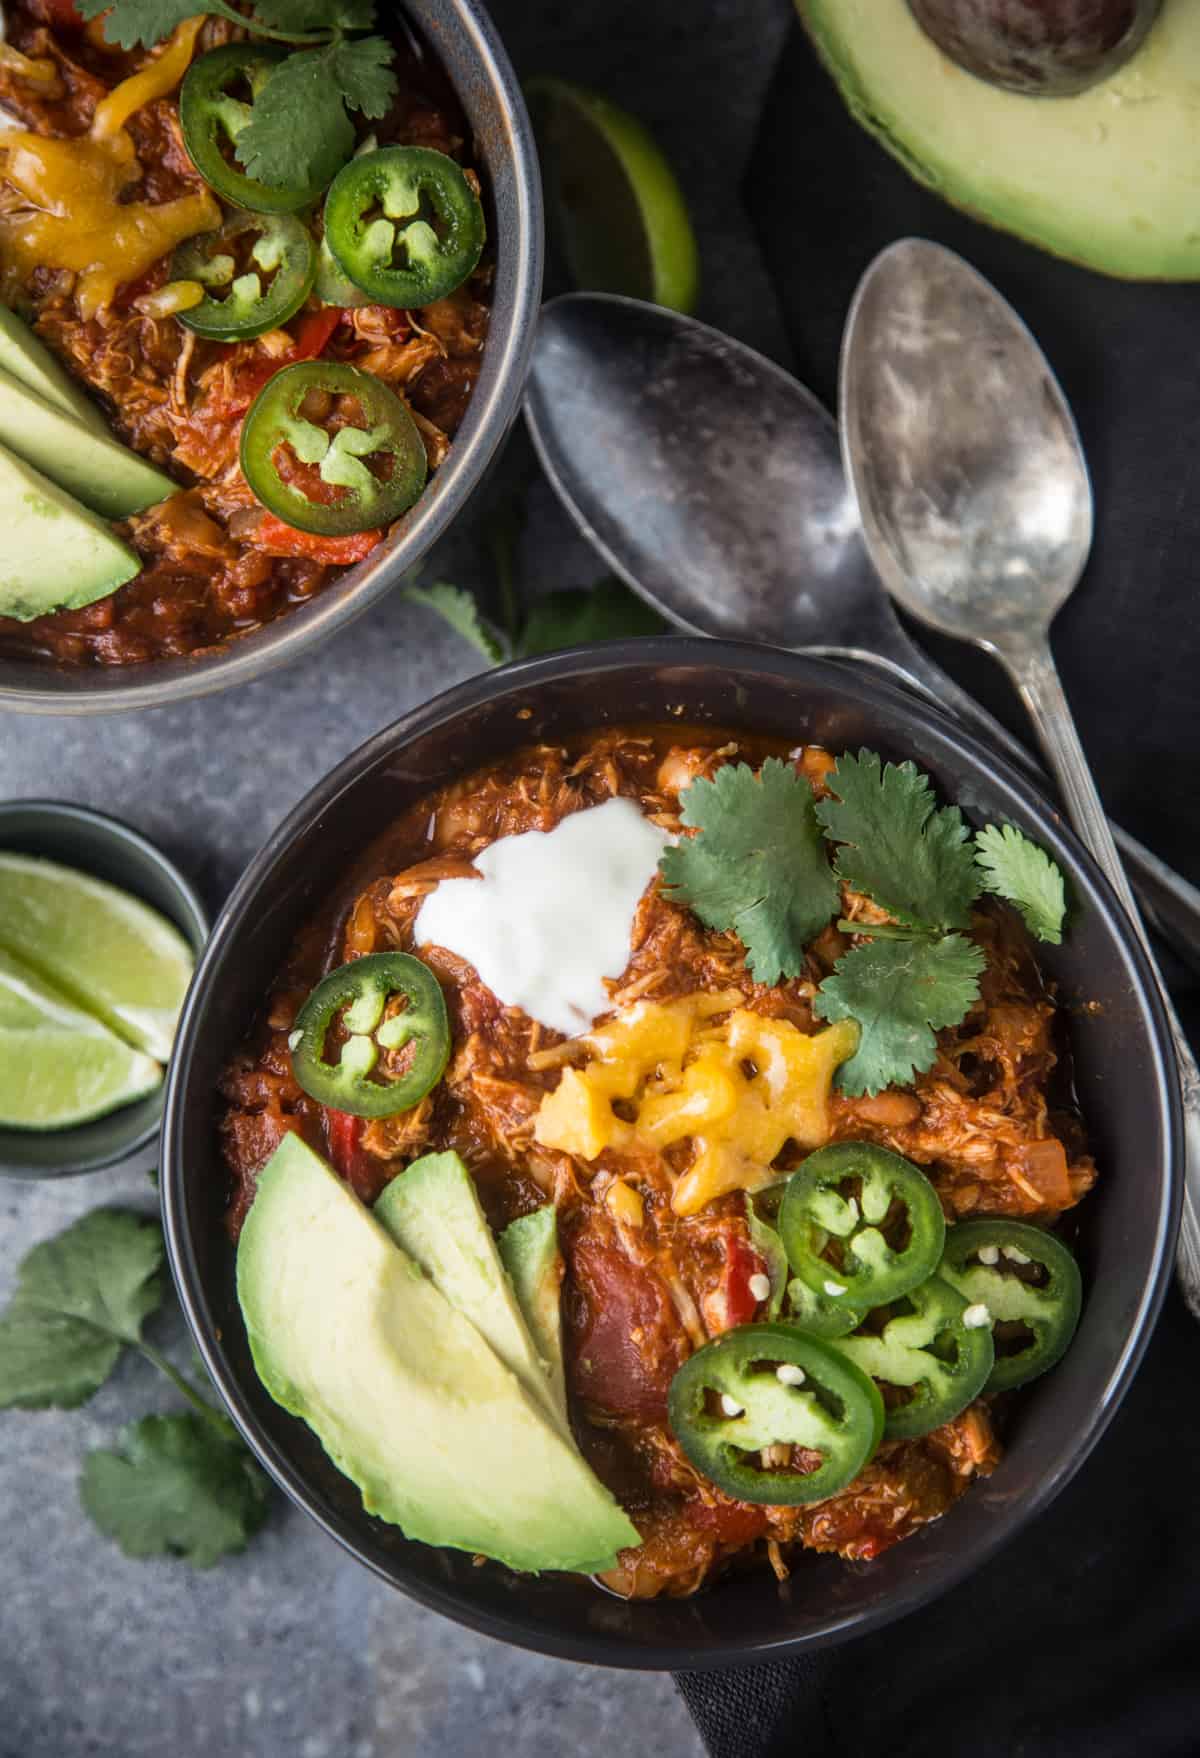 Two bowls full of smoked chicken chili topped with chili toppings